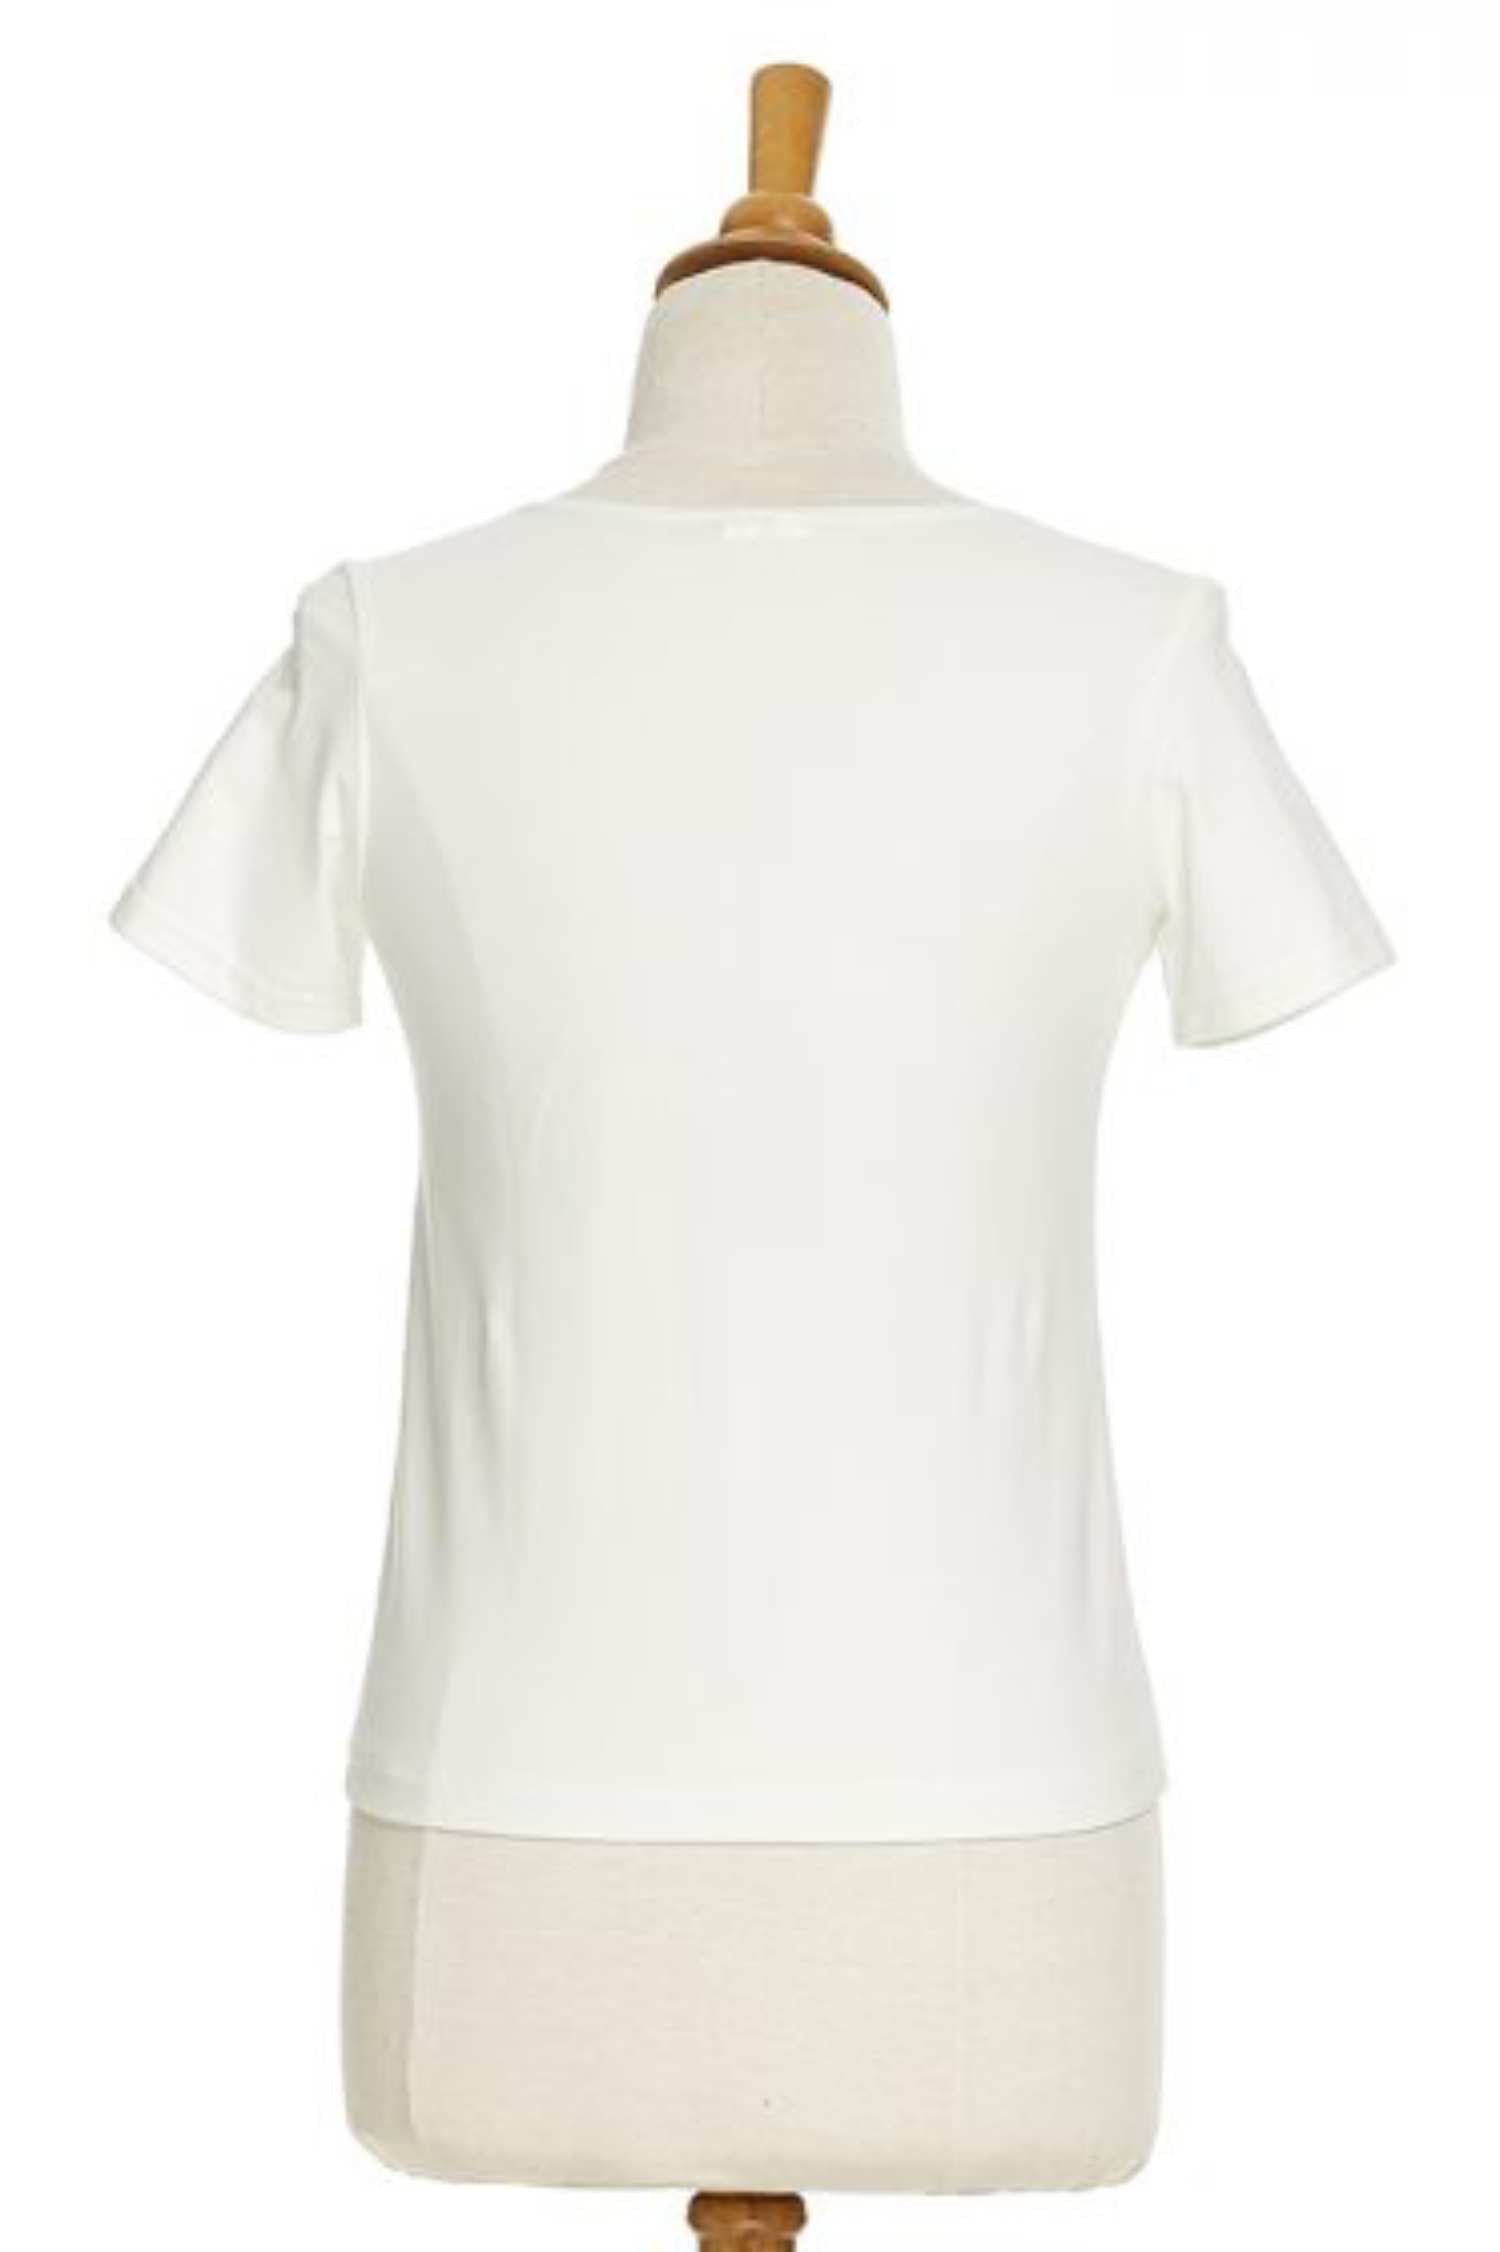 Camelia T-Shirt by Rien ne se Perd, White, back view, scoop neck, short sleeves, front tie, sizes XS to XXL, made in Quebec